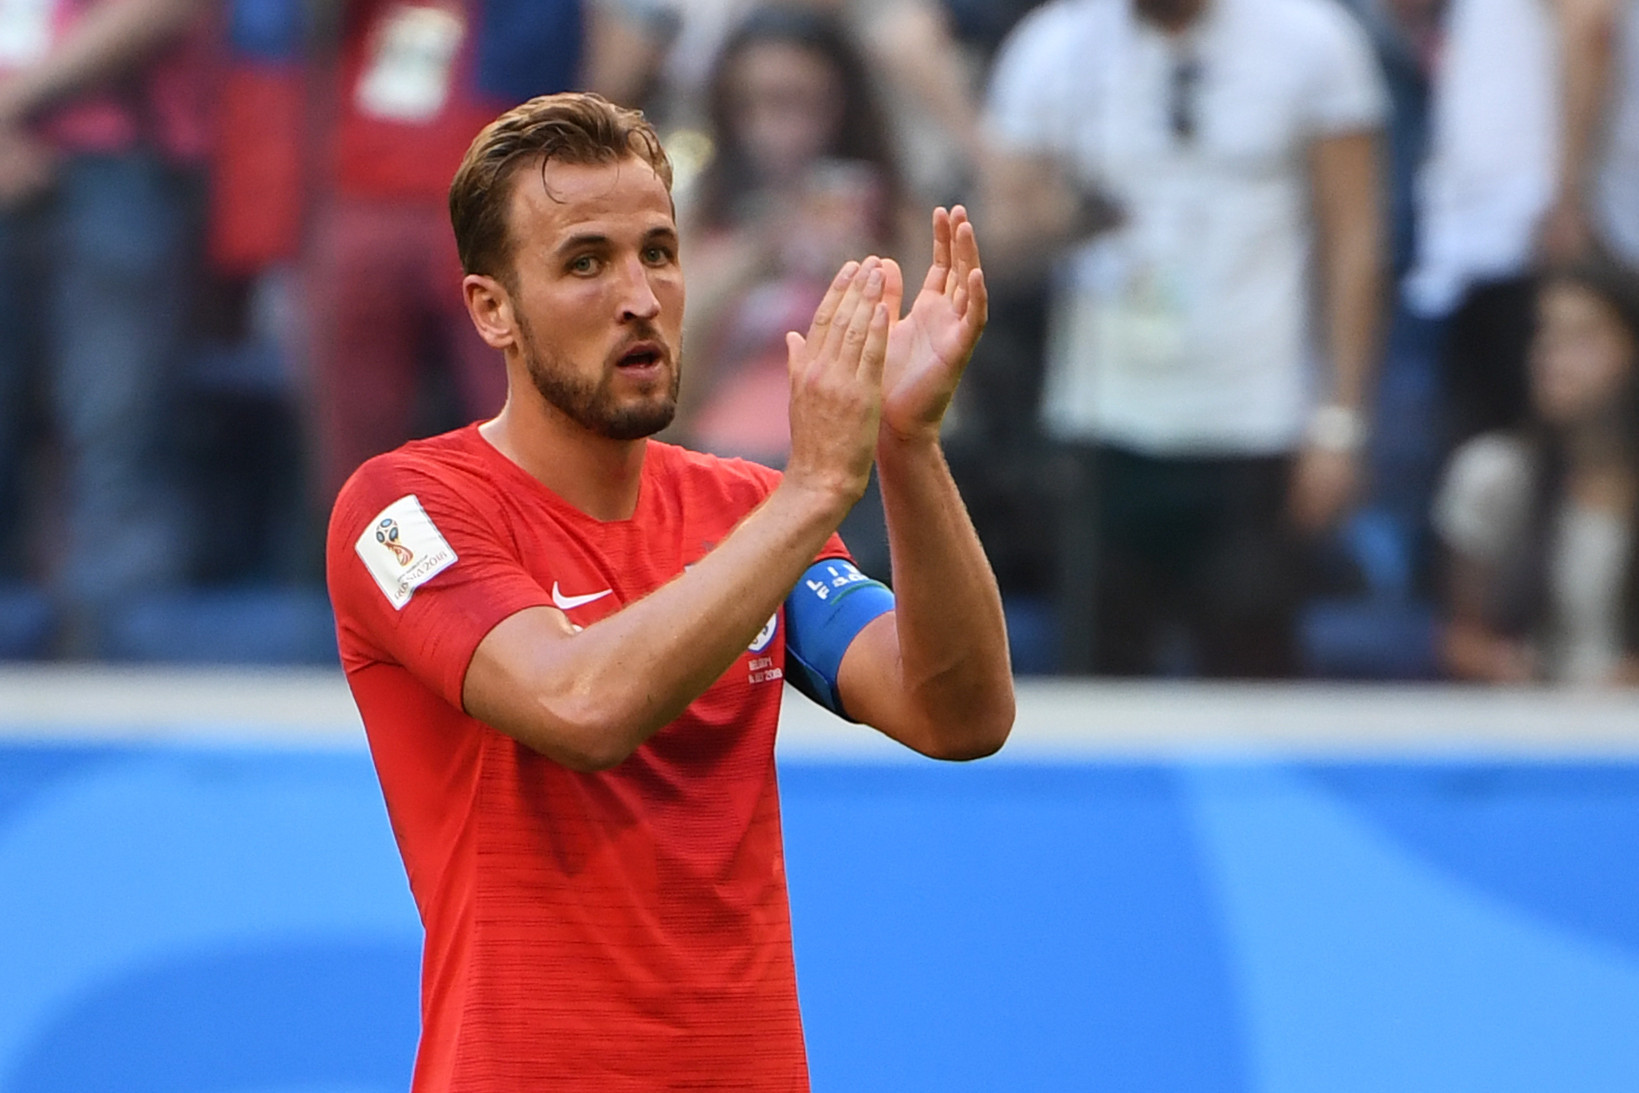 England's Harry Kane looks likely to secure the tournament top goalscorer award ©Getty Images